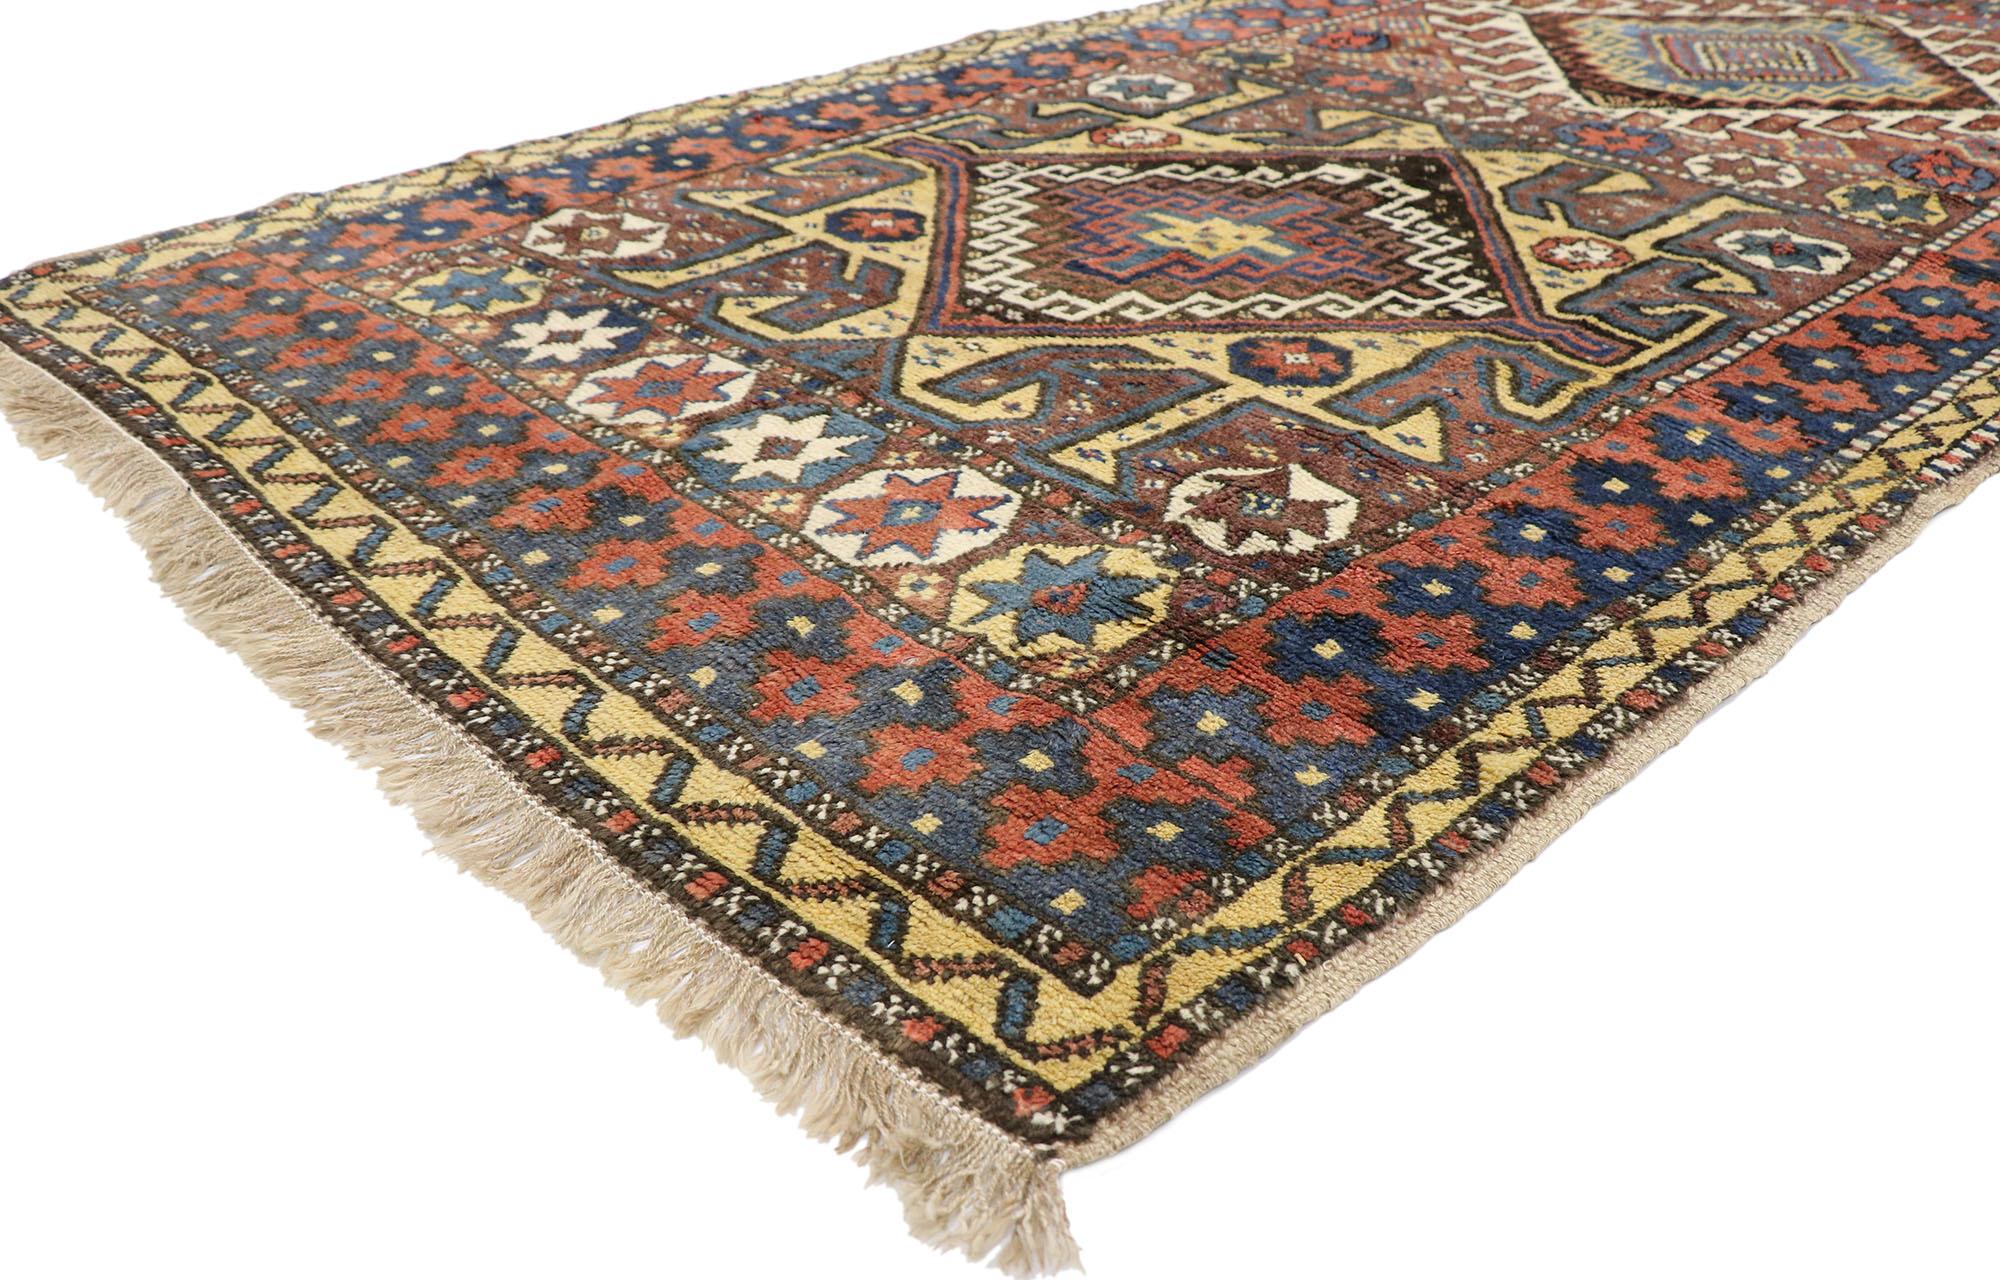 60923 antique Azerbaijan rug with Tribal style 05'00 x 09'03. With its geometric pattern, bold form and earth-tone colors, this hand knotted wool antique Azerbaijan rug possesses rich cultural attributes representing the beauty of tribal weaving.